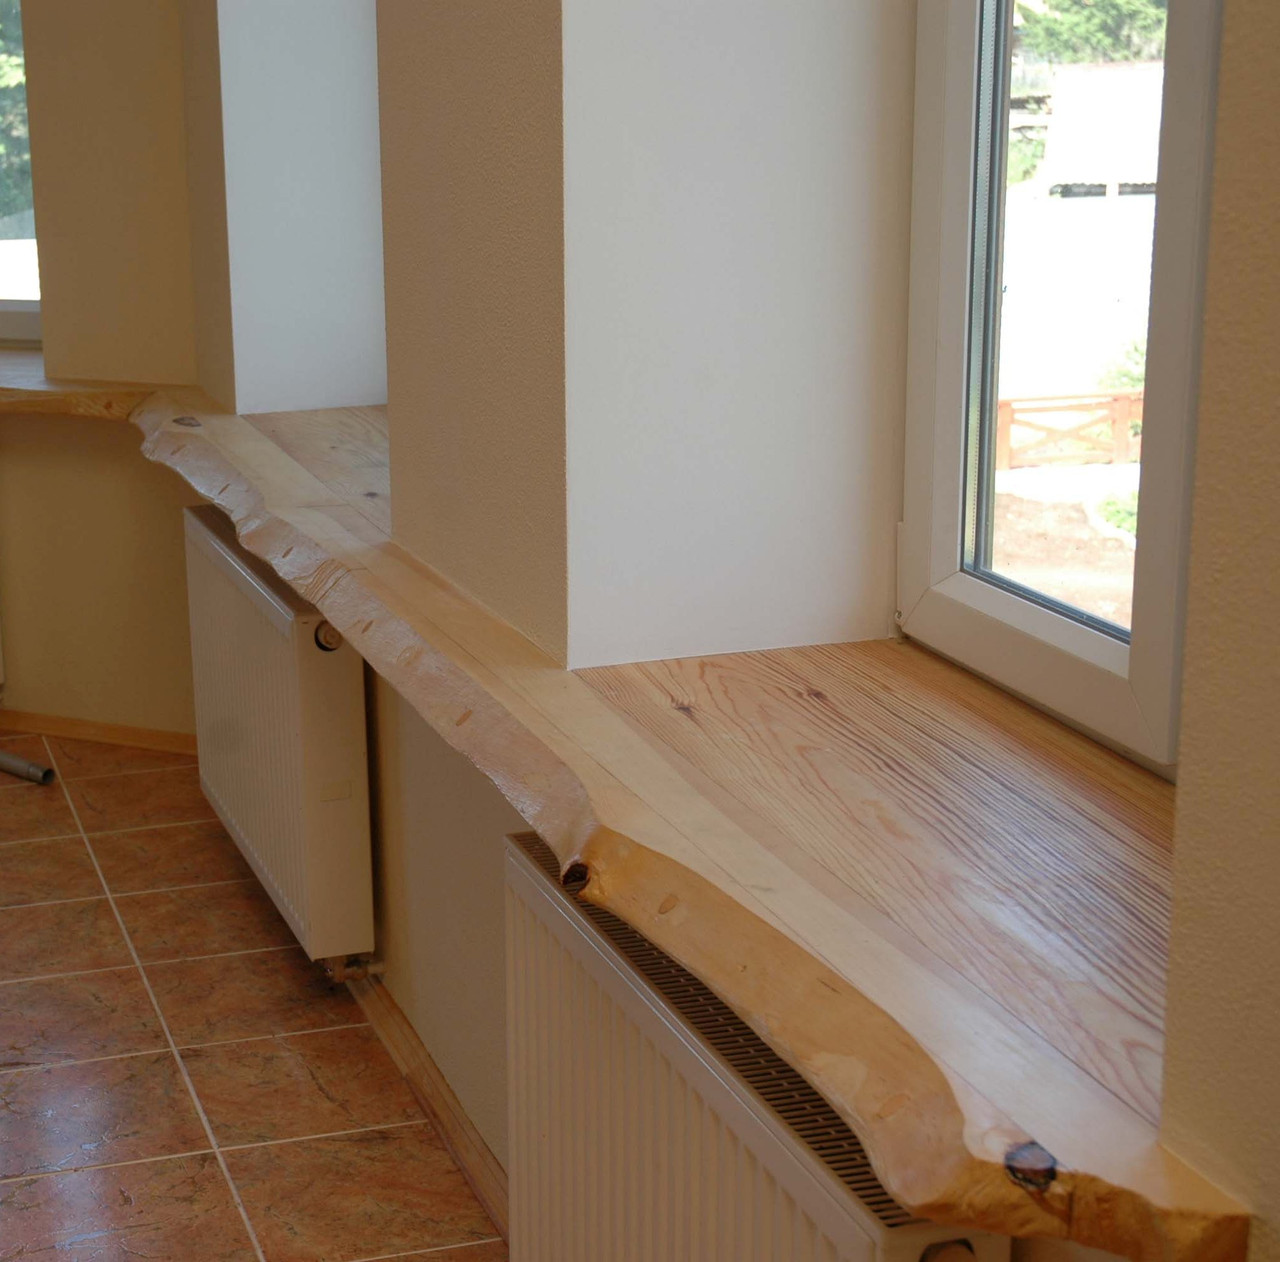 Wooden Window Sills 44 Photos Options For Wood In The